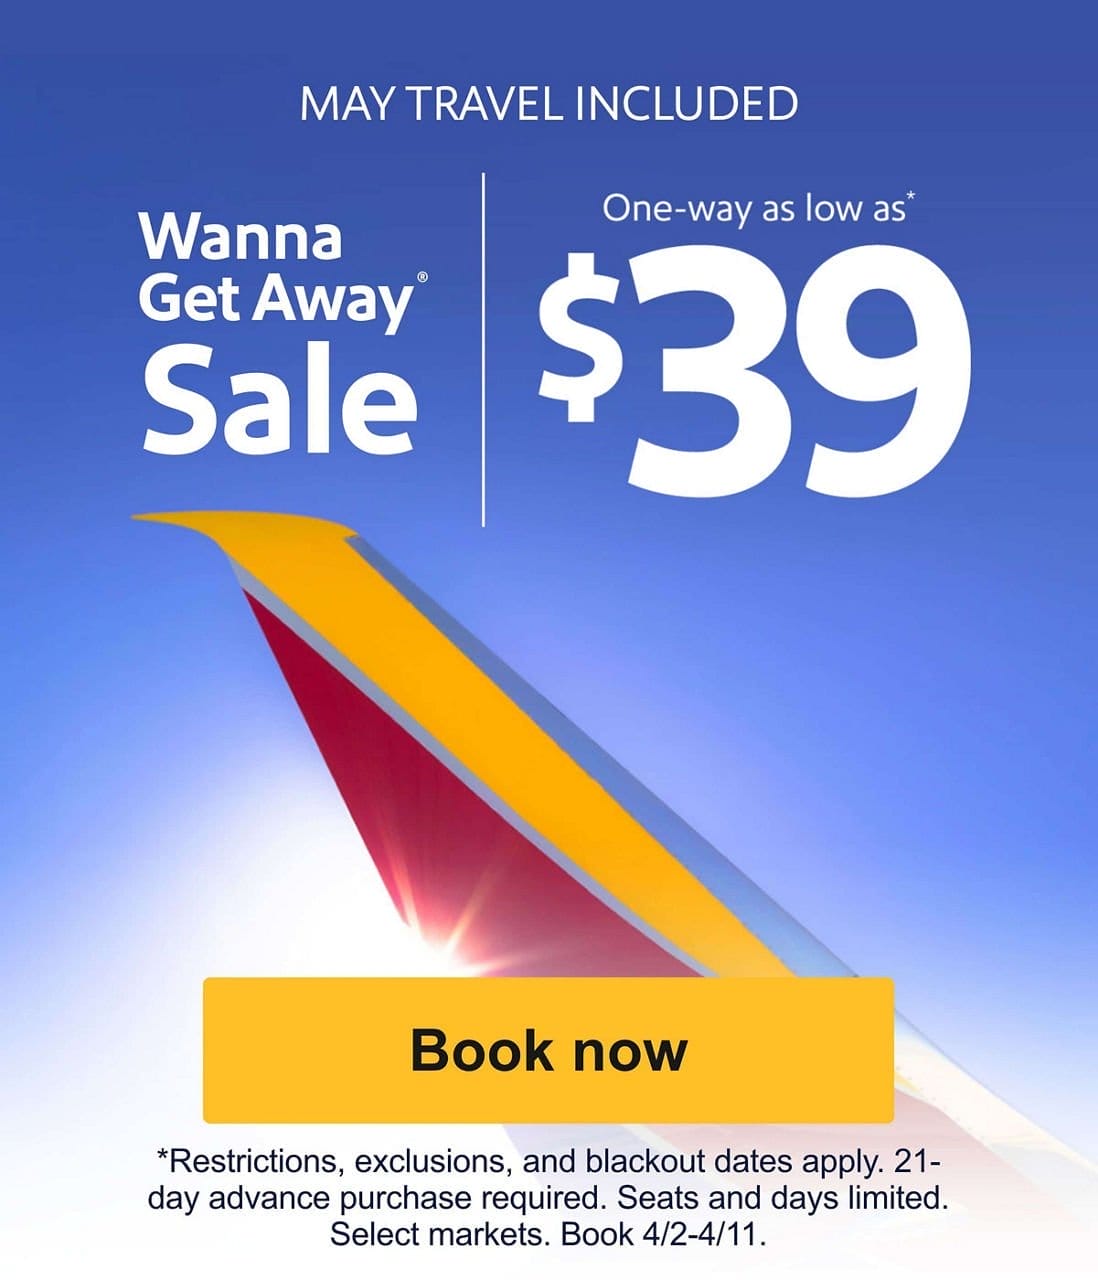 APRIL & MAY TRAVEL INCLUDED Wanna Get Away® Sale One-way as low as* \\$39 Book now *Restrictions, exclusions, and blackout dates apply. 21-day advance purchase required. Seats and days limited. Select markets. Book 4/2-2/11.